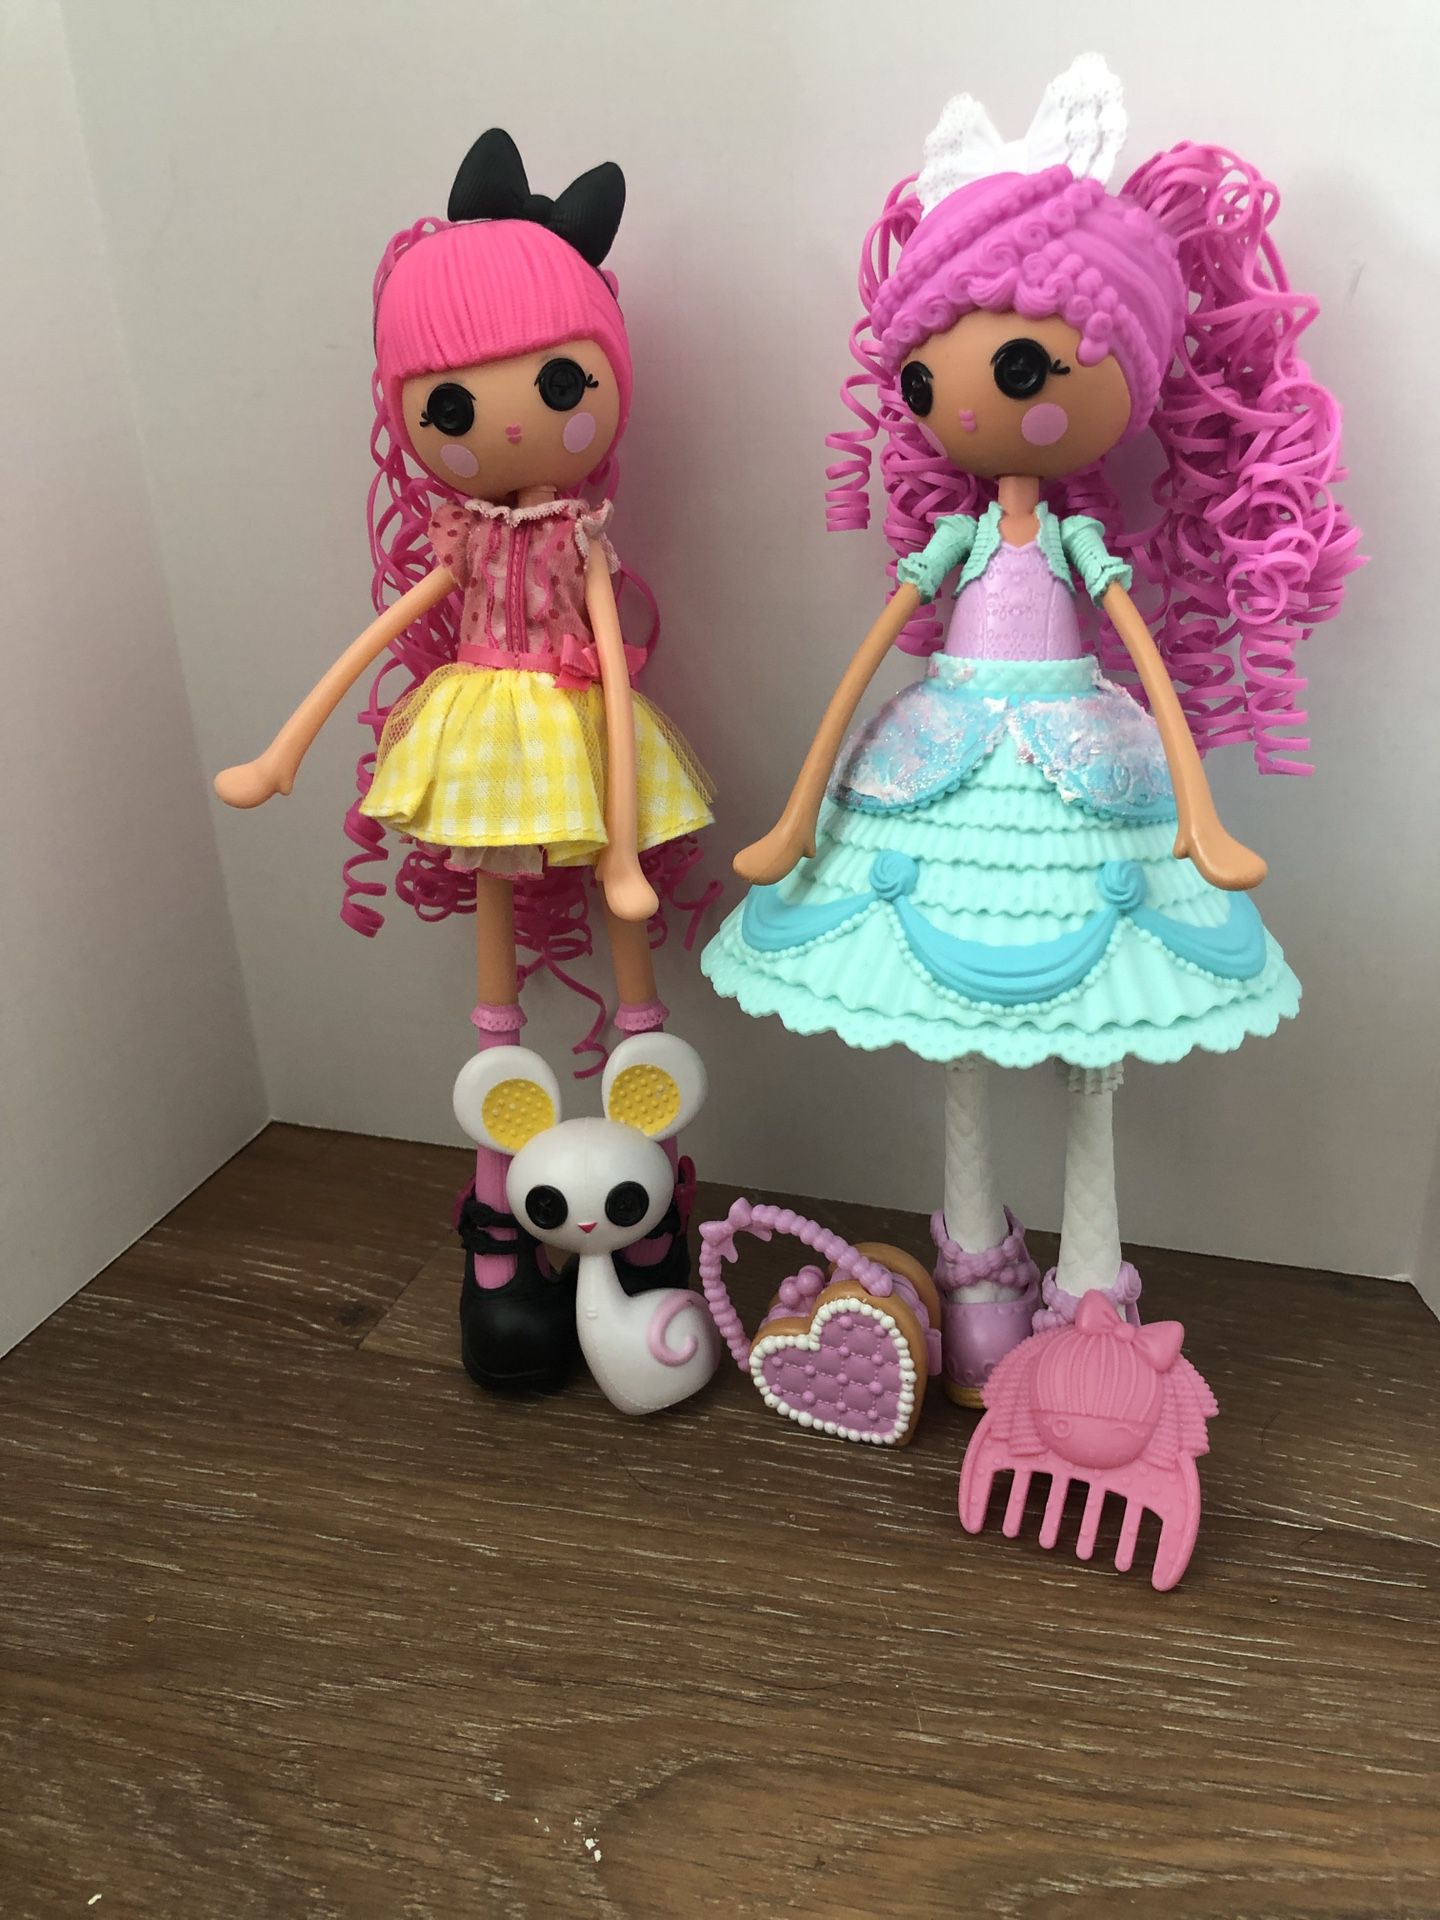 Lalaloopsy Girls Dolls - Fancy Frost 'N' Glaze(Decorated) and Crumbs Sugar Cookie